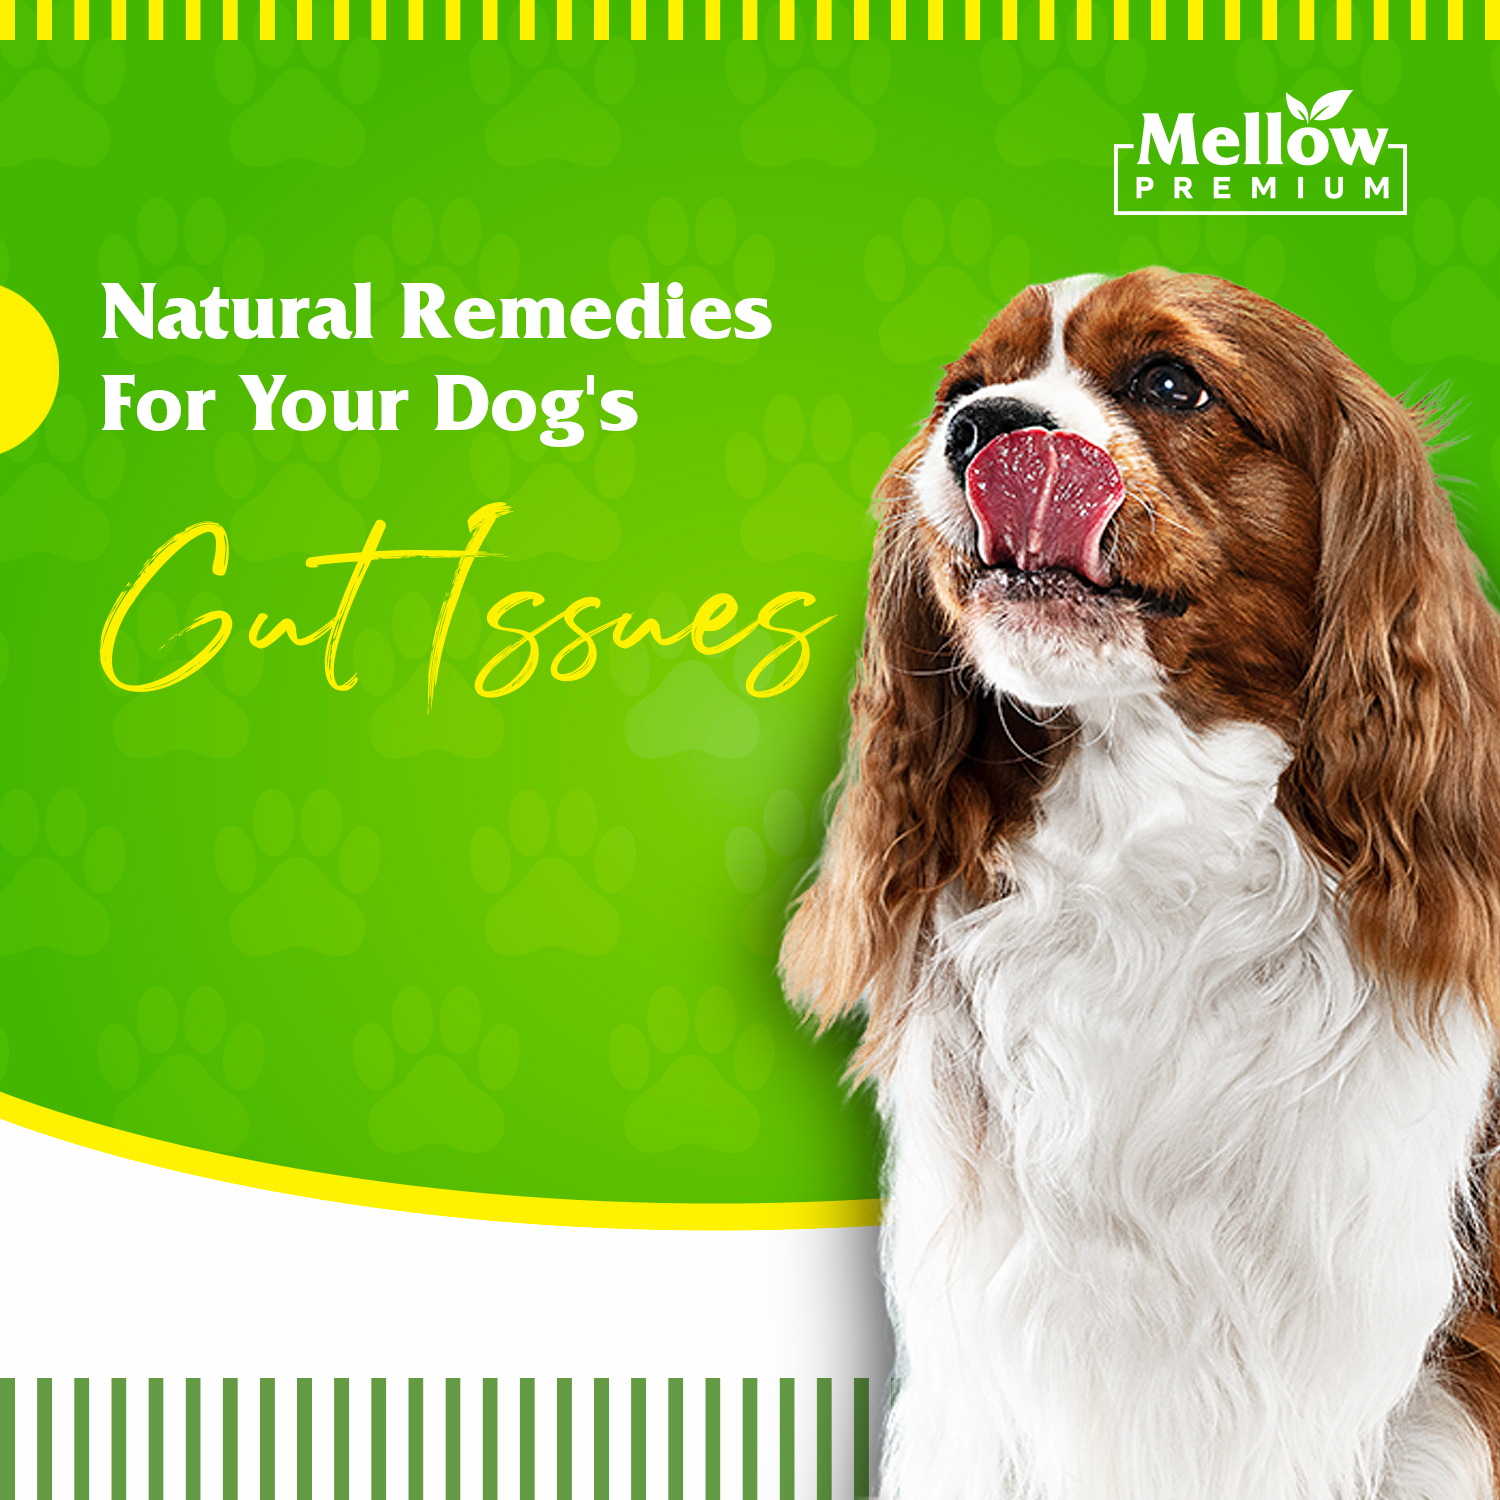 Natural Remedies for Your Dog's Gut Issues